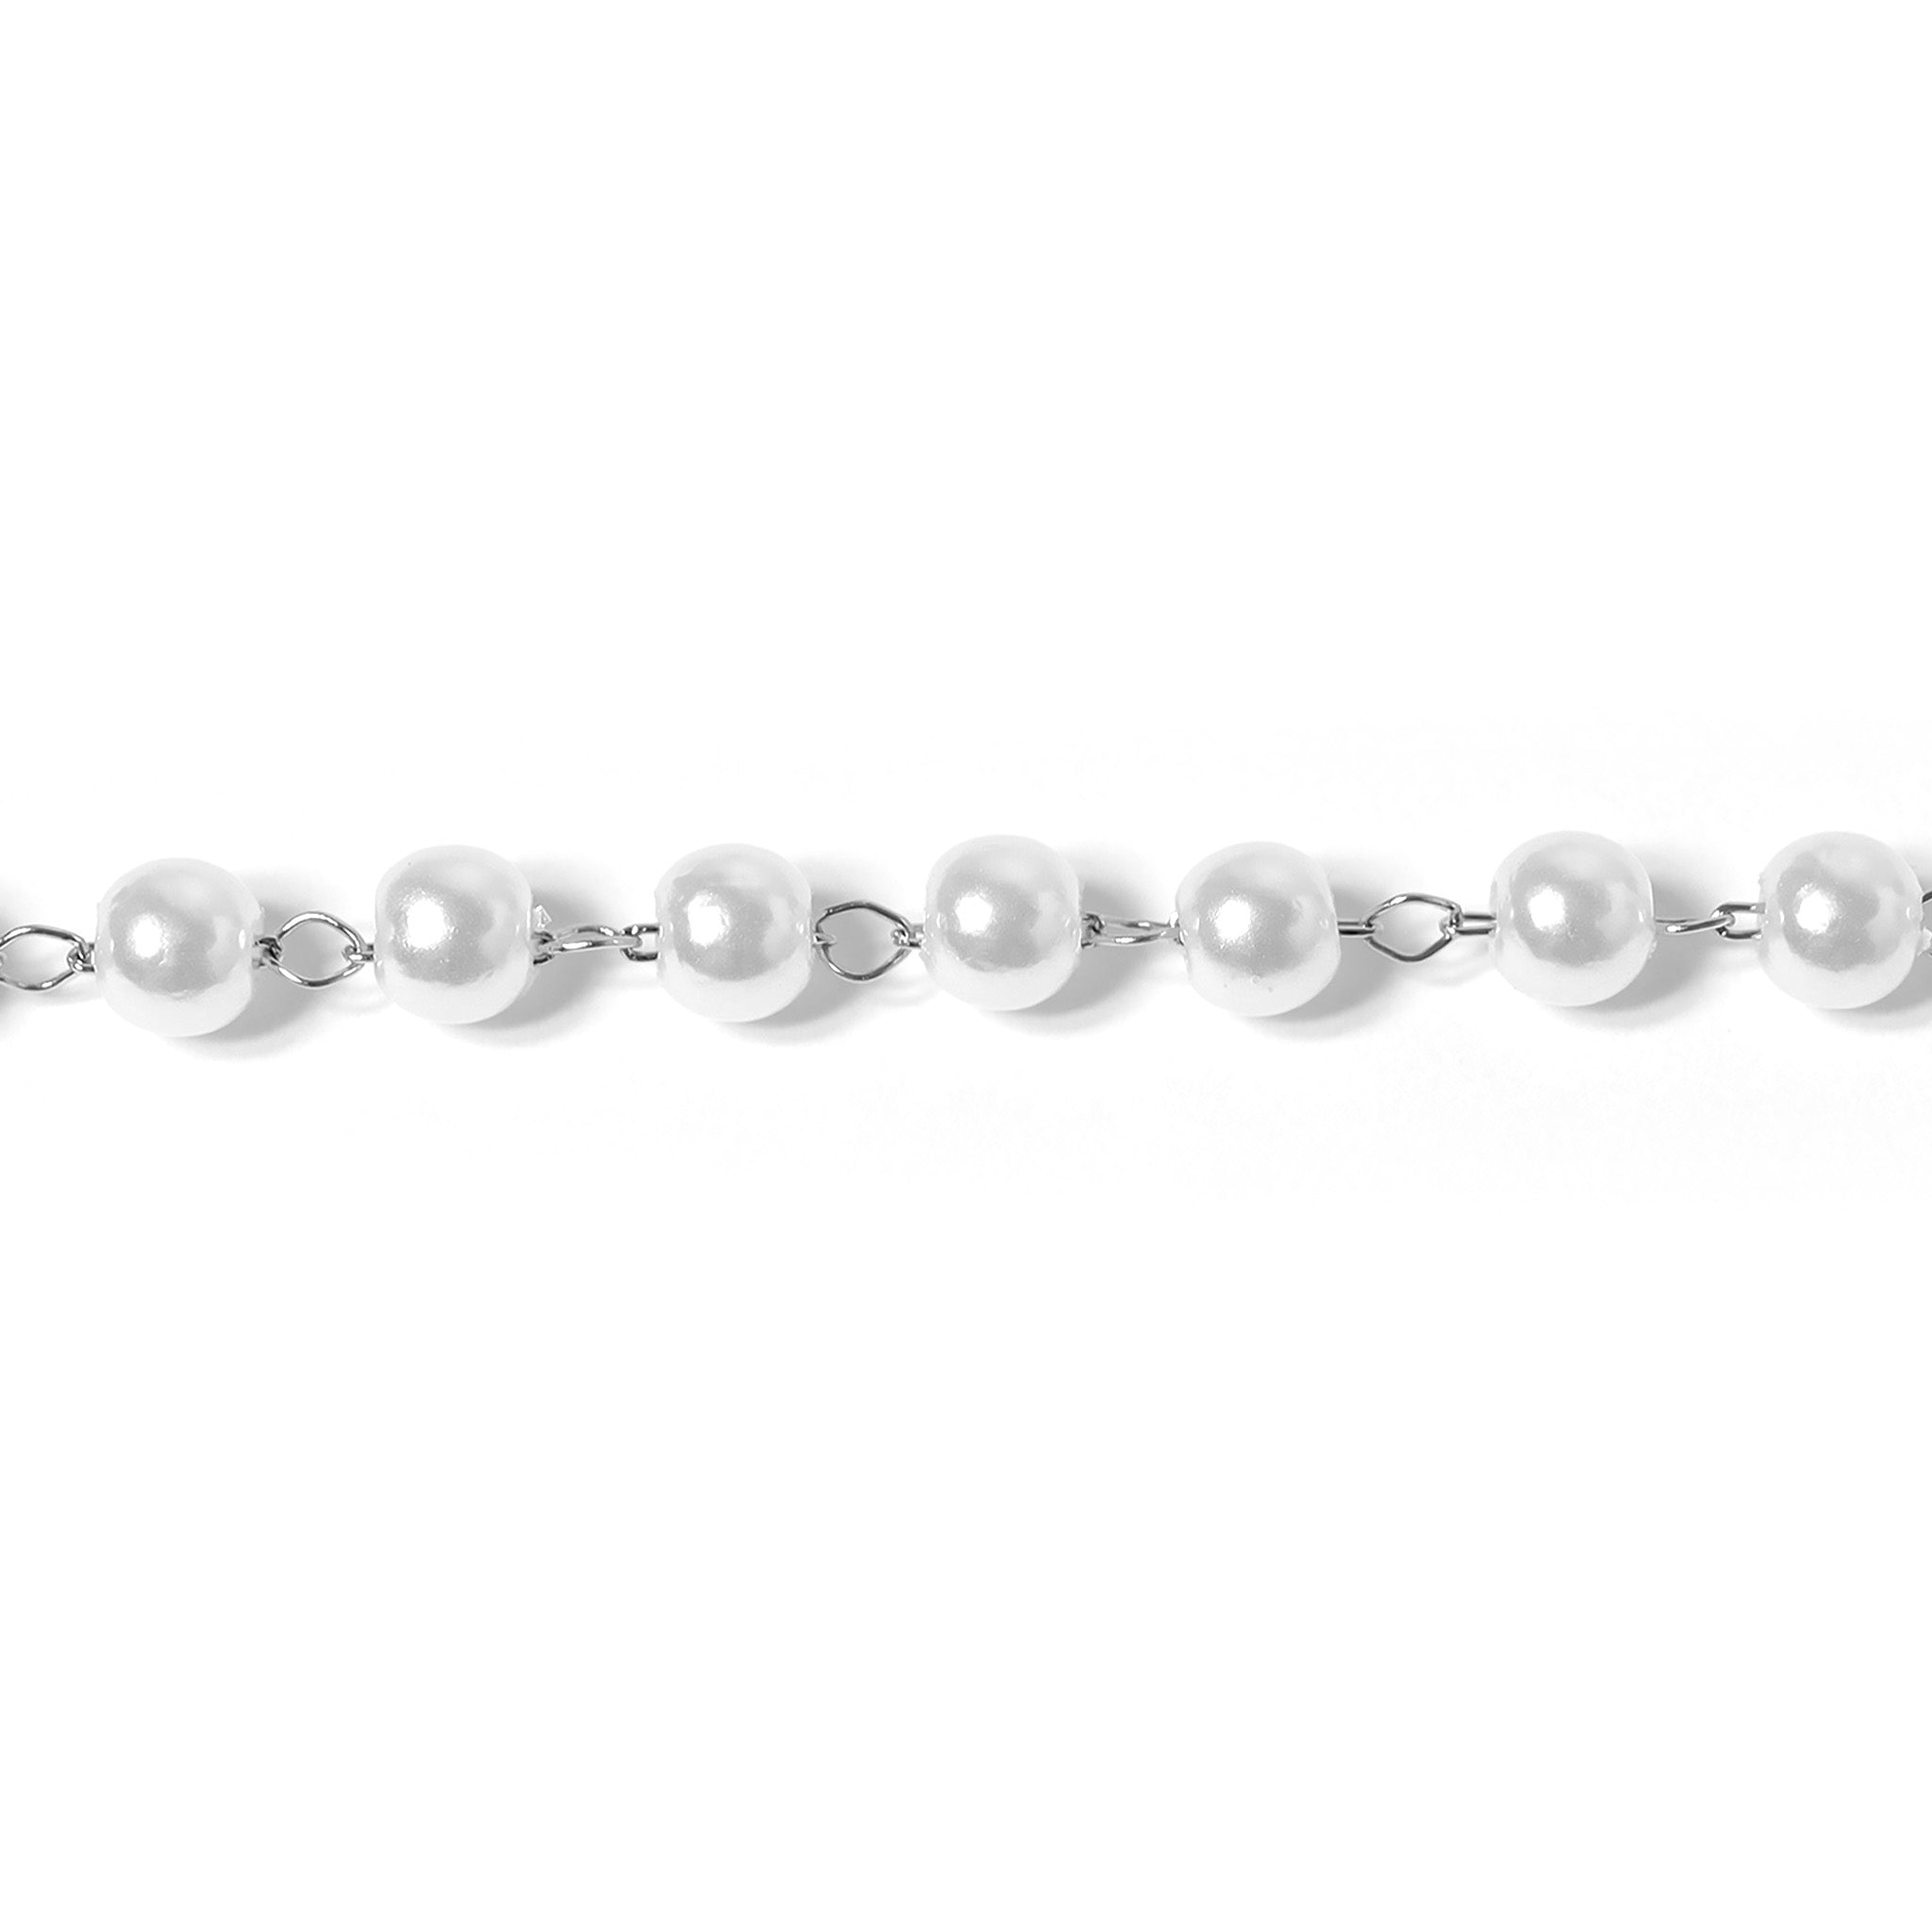 Vannise Pull Chain 10 Feet Stainless Steel Bead Chain, Rustproof &Great  Pulling Force, 6 Size, 3.2mm Pull Chain Extension with 10 Free Clasp  Connectors- Silver - Walmart.com